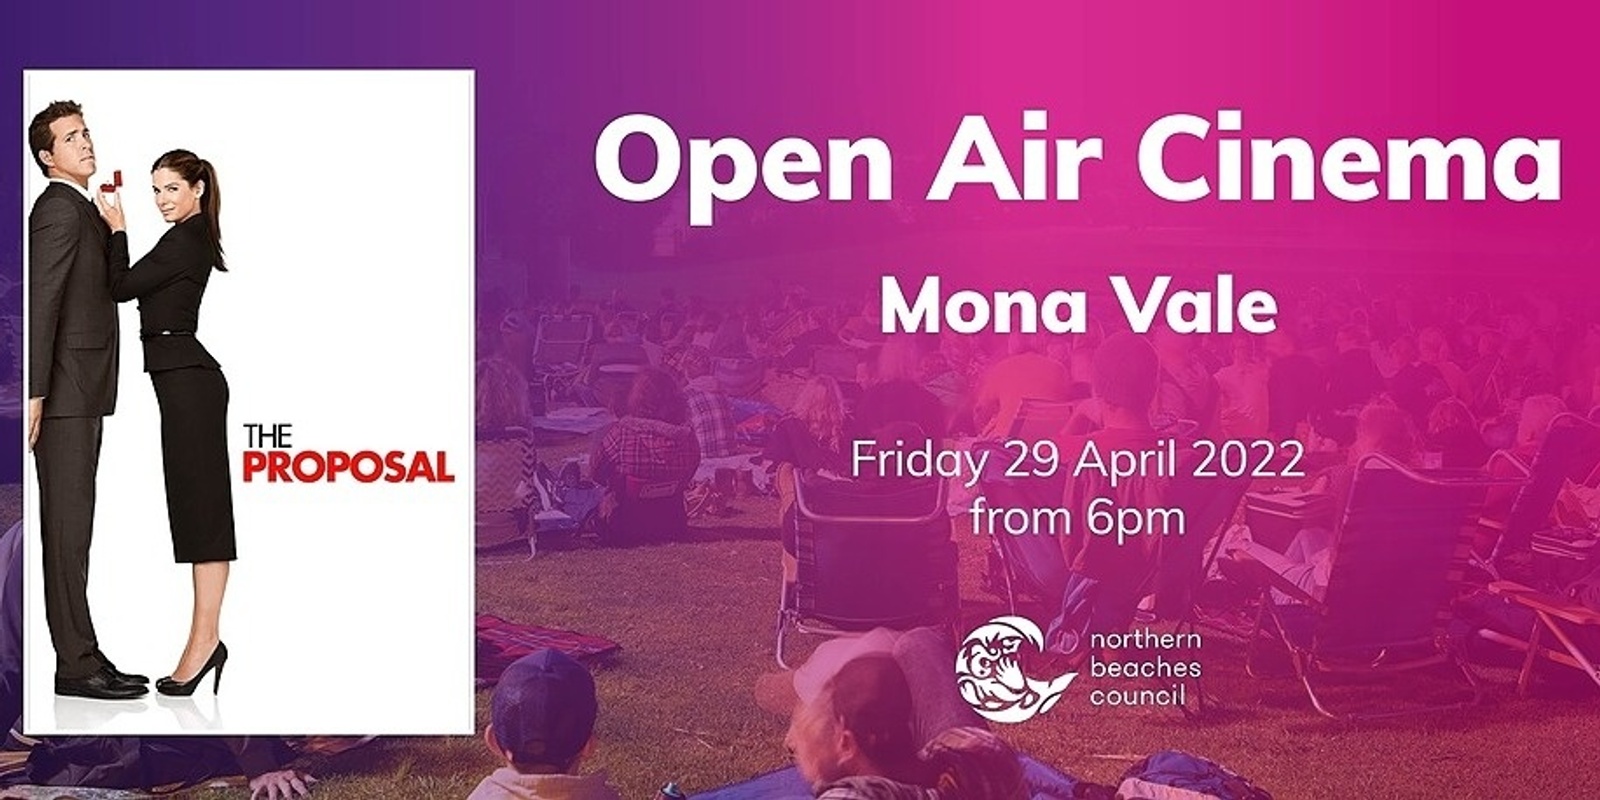 Banner image for Open Air Cinema - Mona Vale - Friday 29 April 2022 - The Proposal